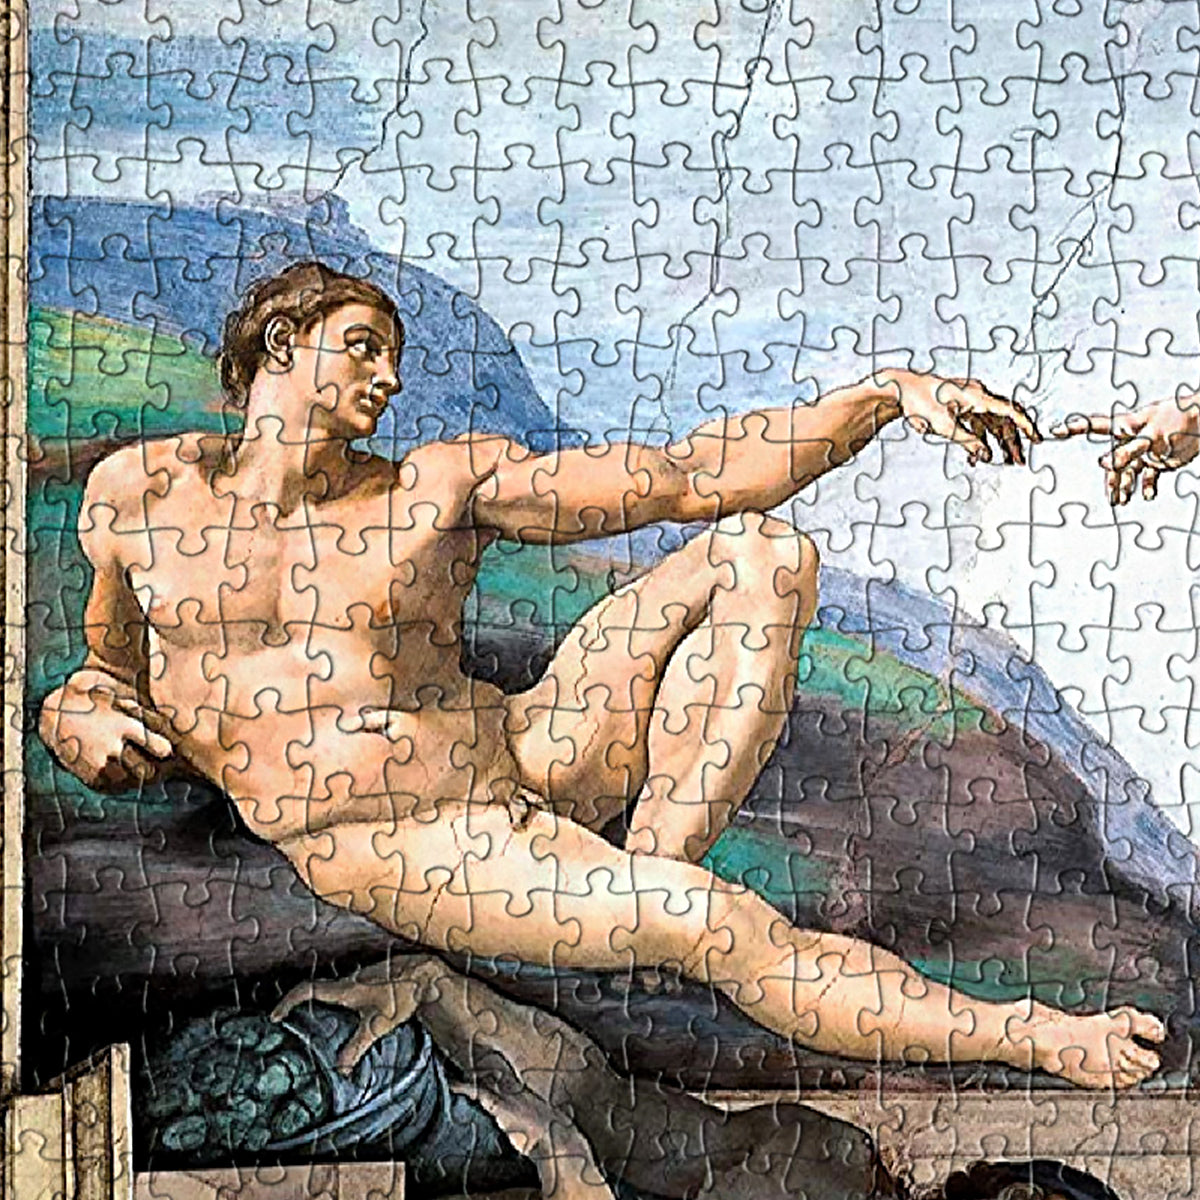 Michelangelo's famous painting 'The Creation of Adam' in puzzle form